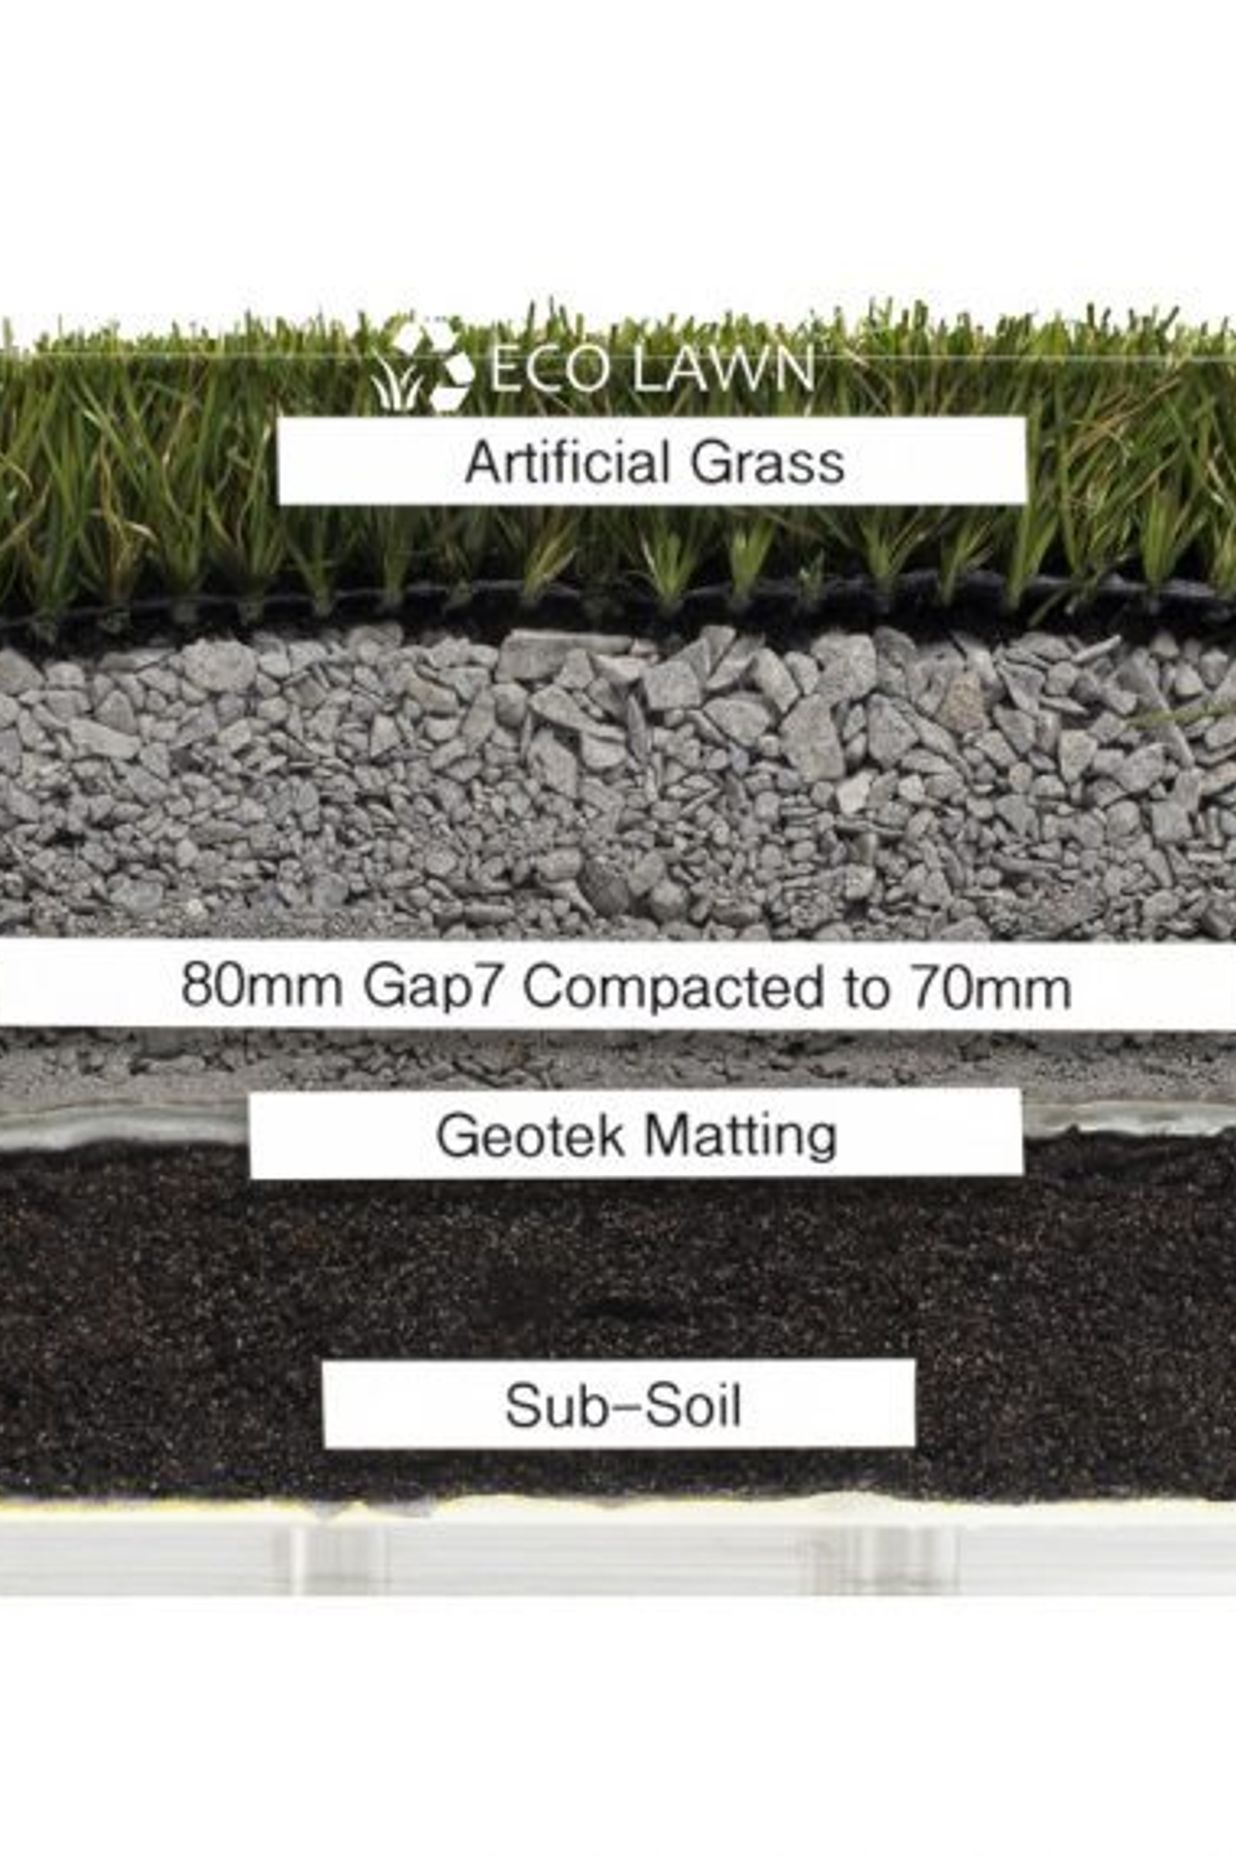 Cross-section of Eco Lawn's artificial grass installation and groundworks.